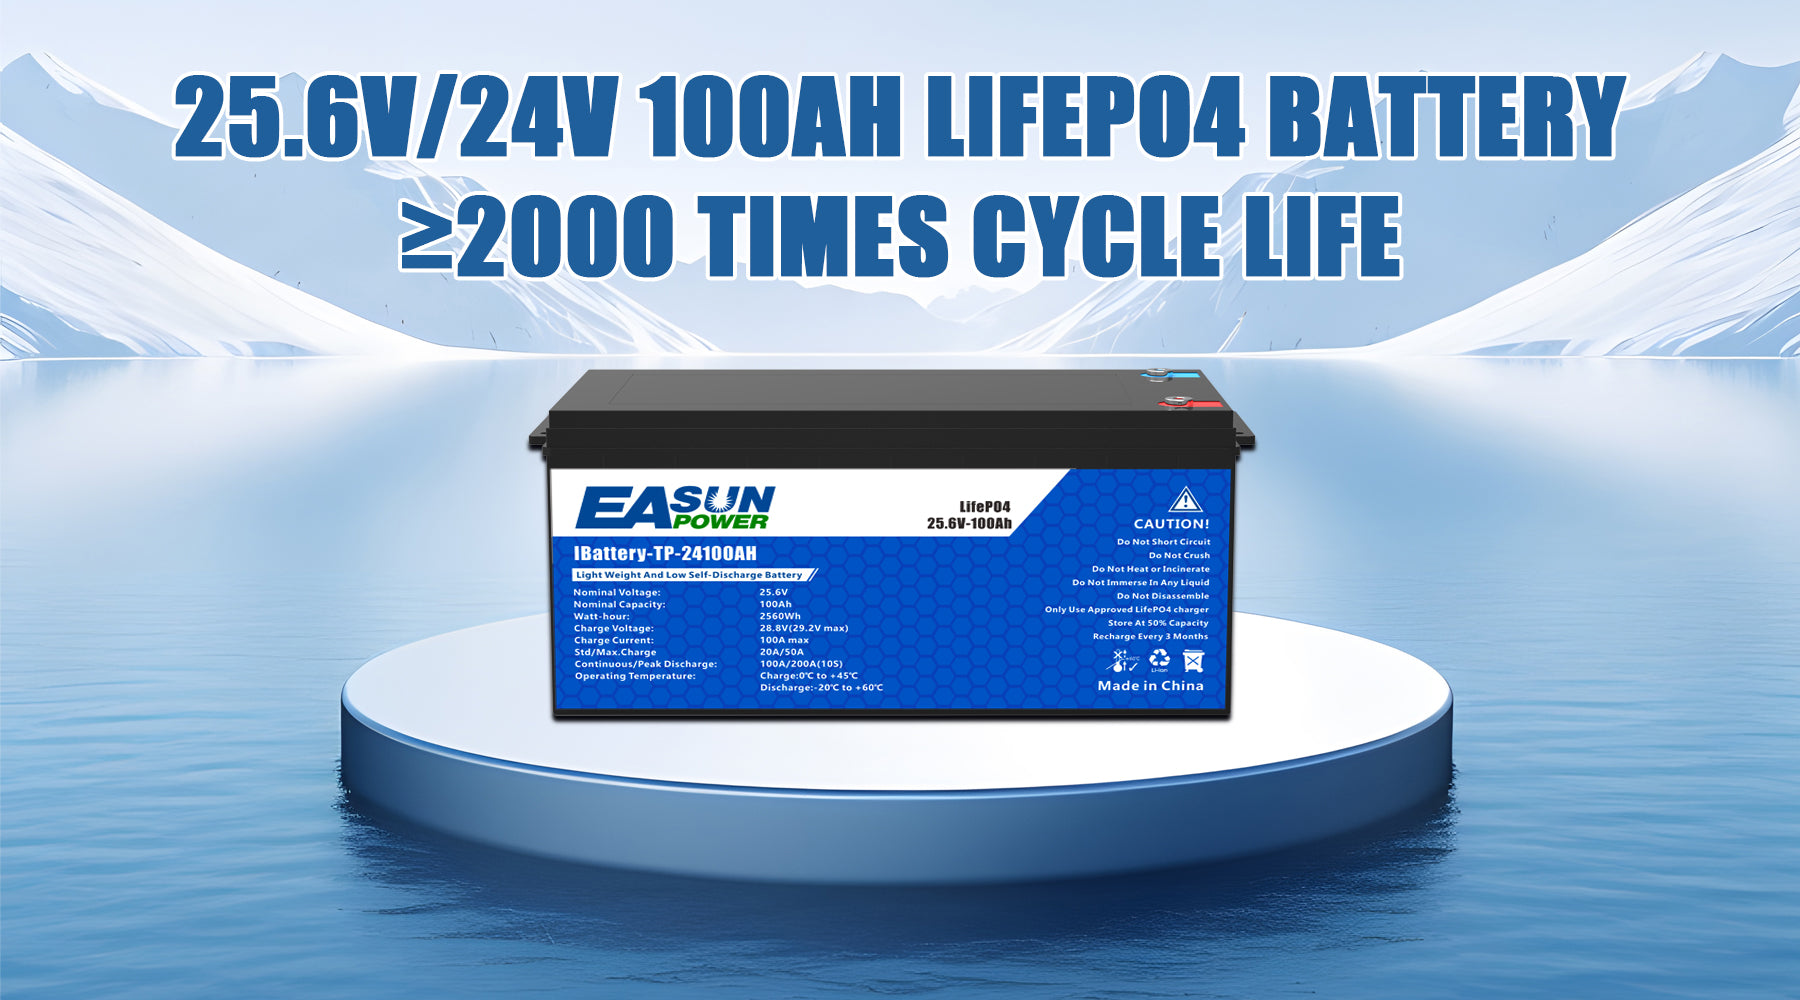 Lithium Batteries: 7 Ways to Save Battery Power